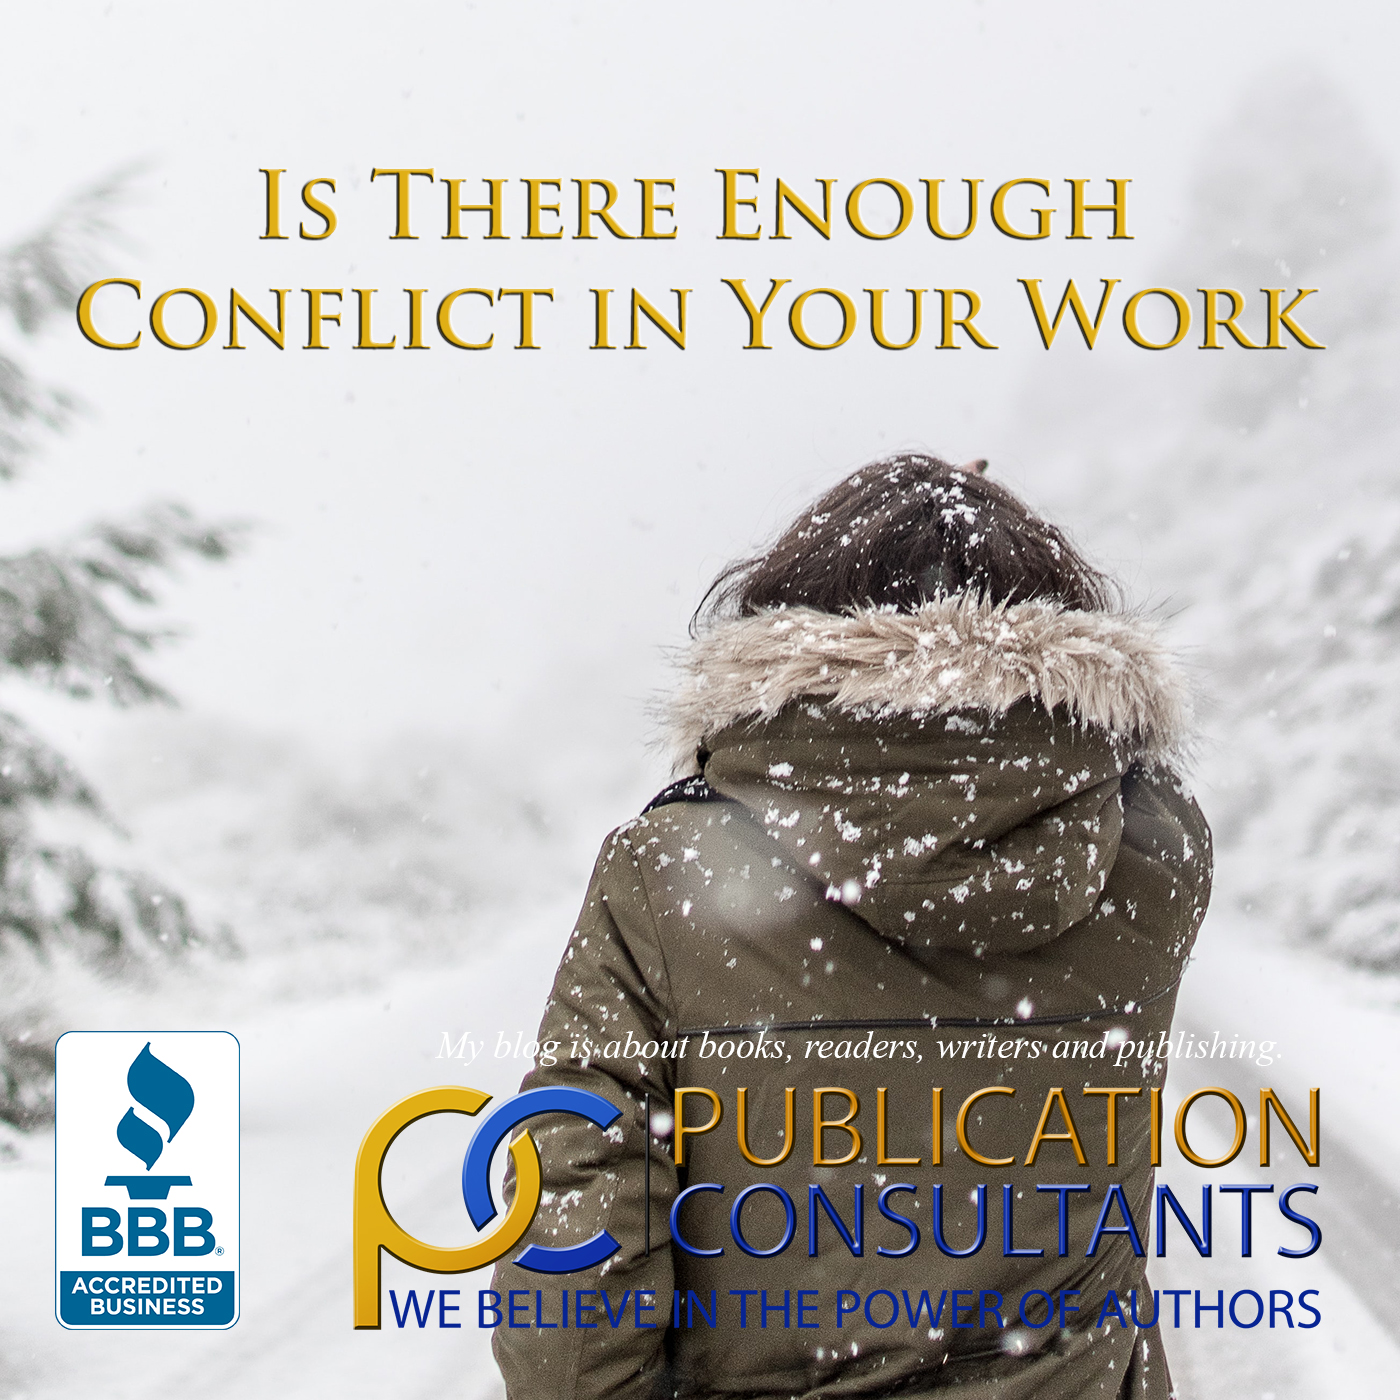 Is There Enough Conflict in Your Work